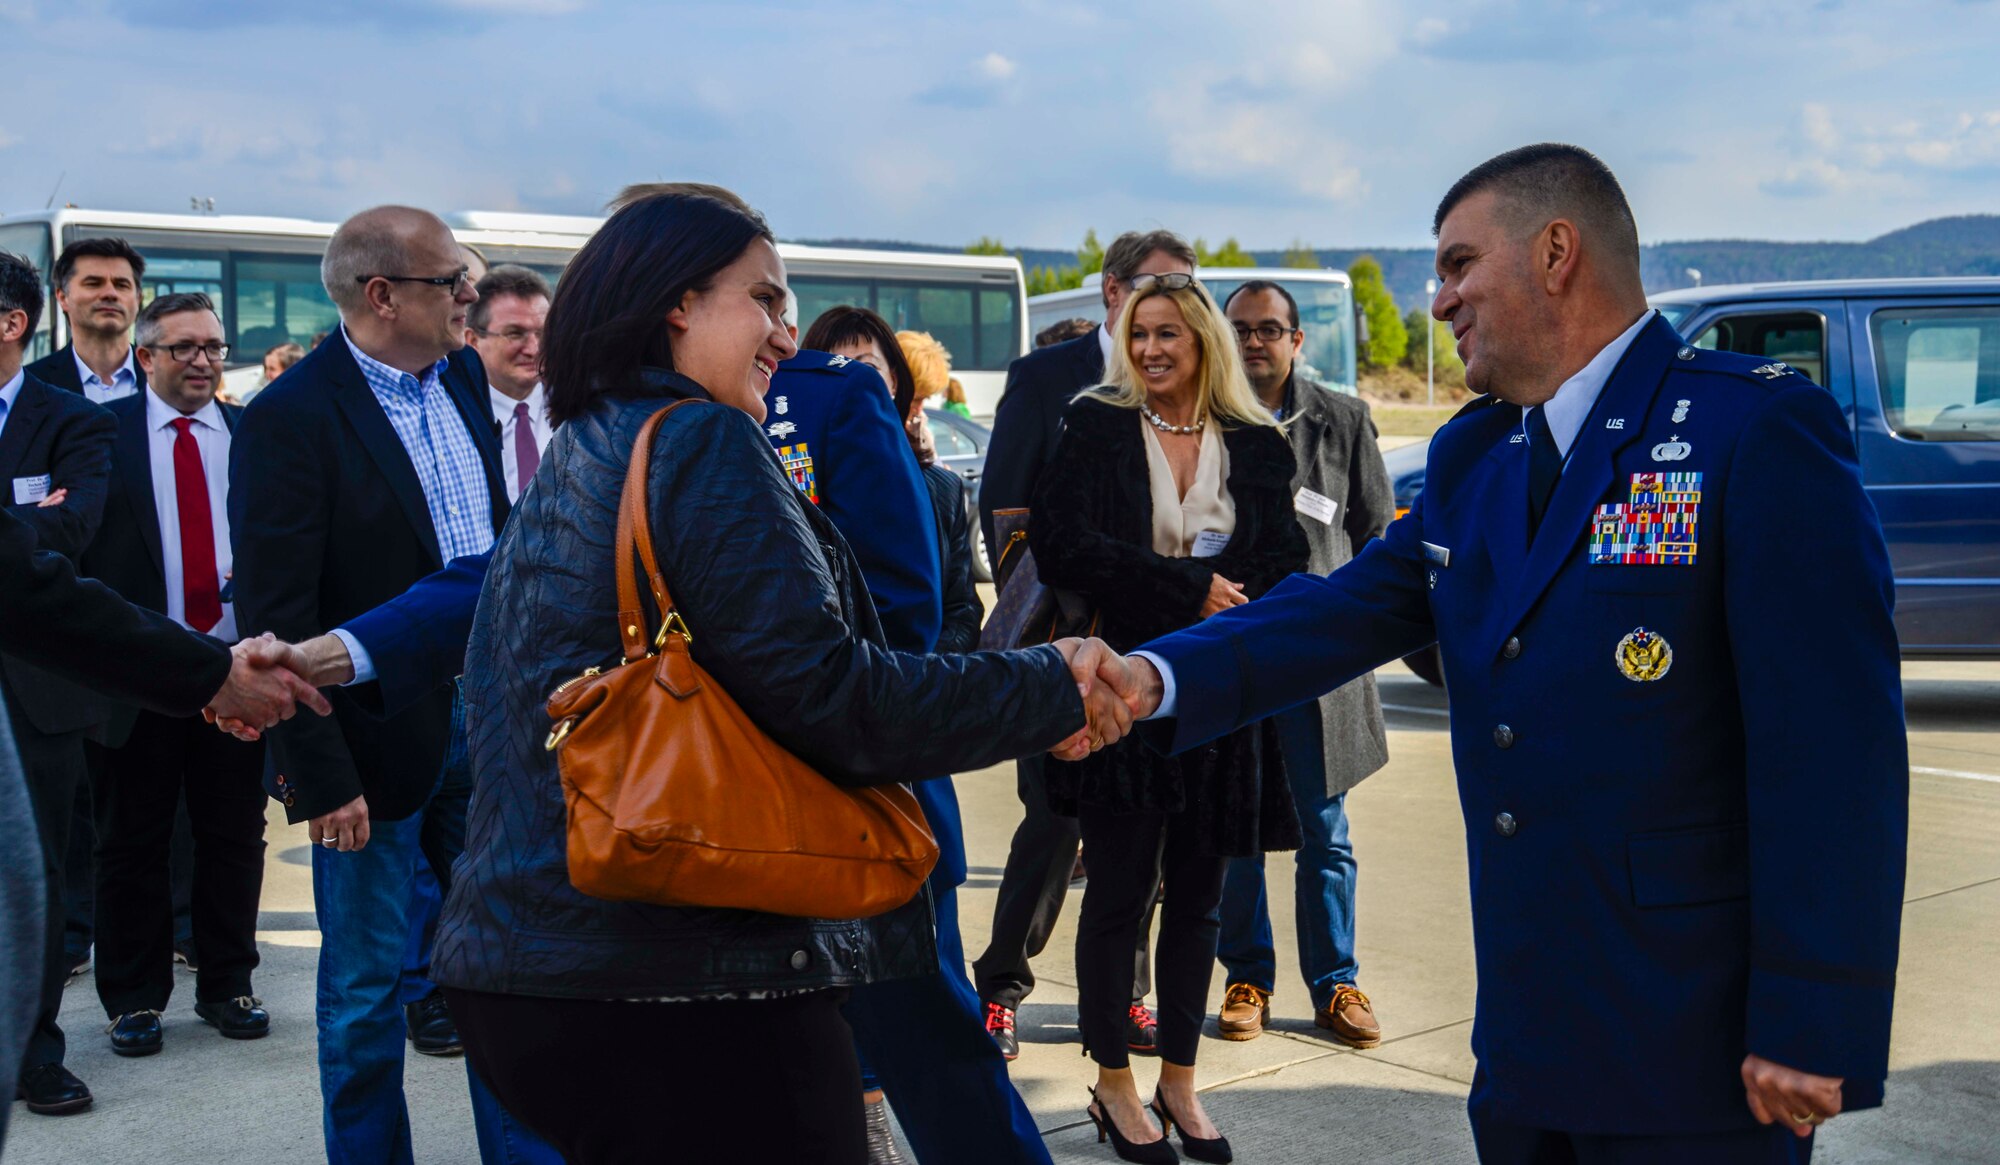 Col. Michael Roberts, 86th Medical Group deputy commander, greets civilian medical providers from the Kaiserslautern Military Community during a tour on Ramstein Air Base, Germany, April 27, 2017. The biennial tour aims to maintain and increase the partnership between military and local civilian medical providers. (U.S. Air Force photo/Staff Sgt. Timothy Moore)